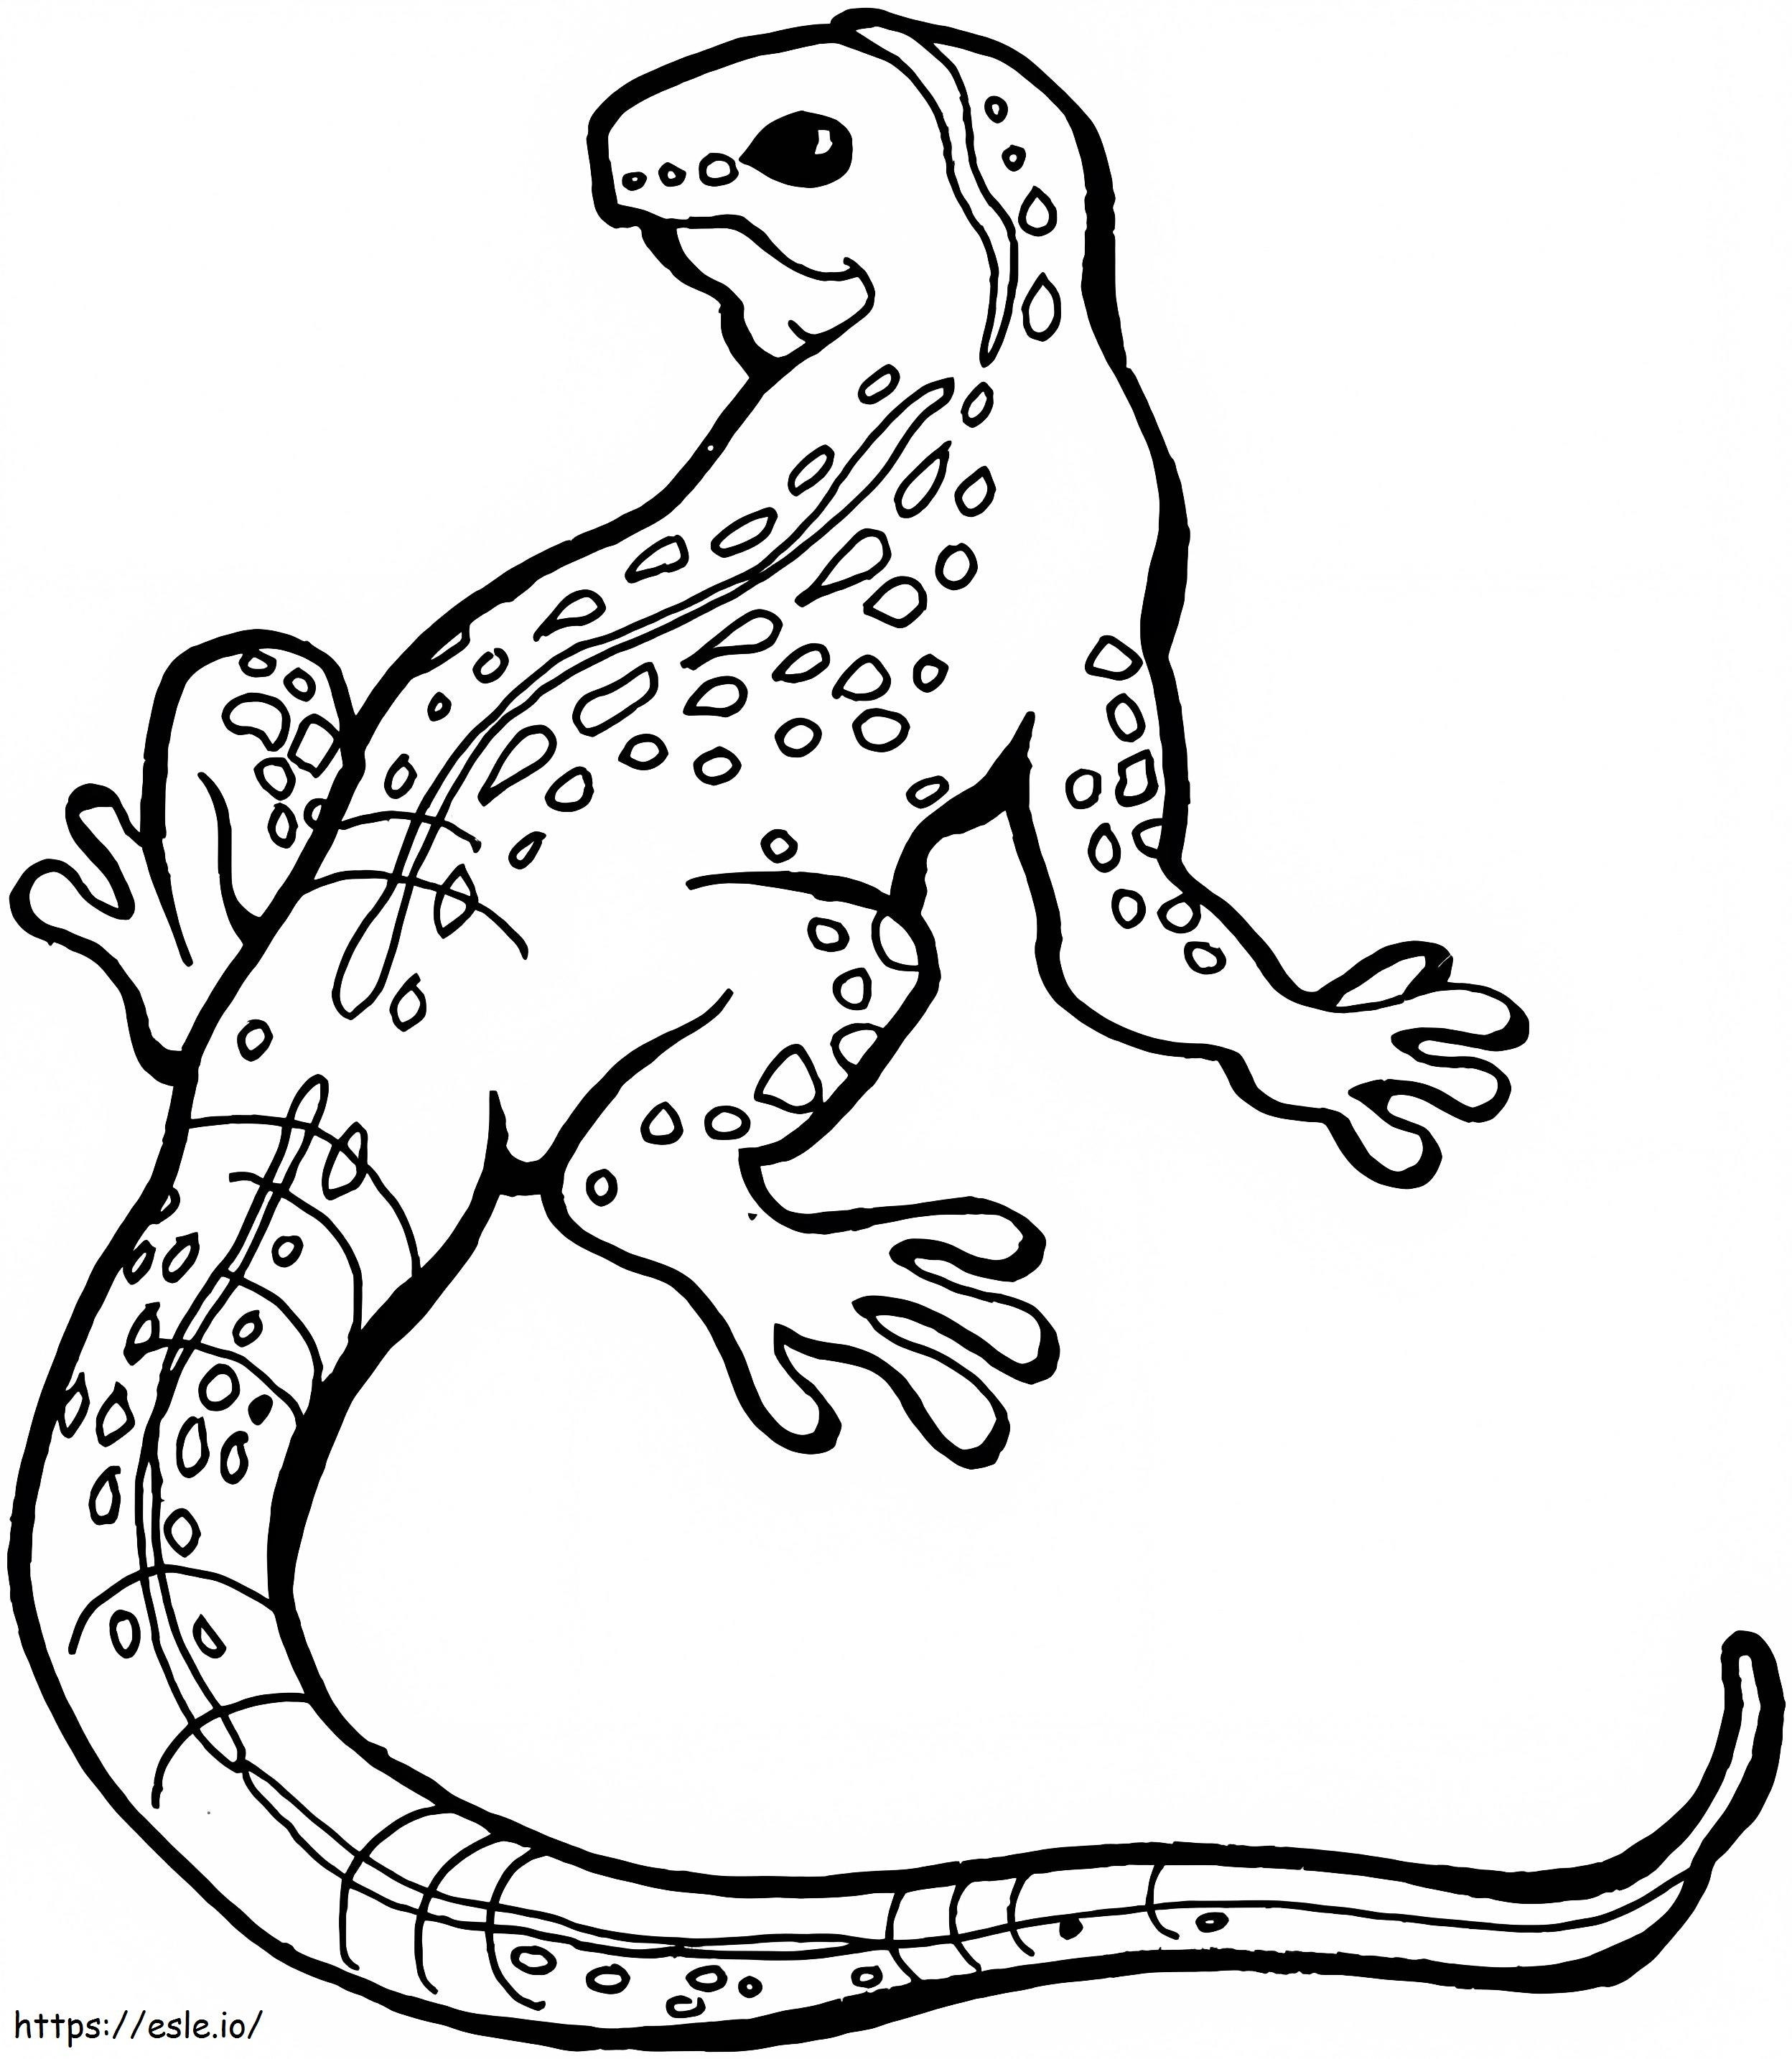 Basic Lizard coloring page